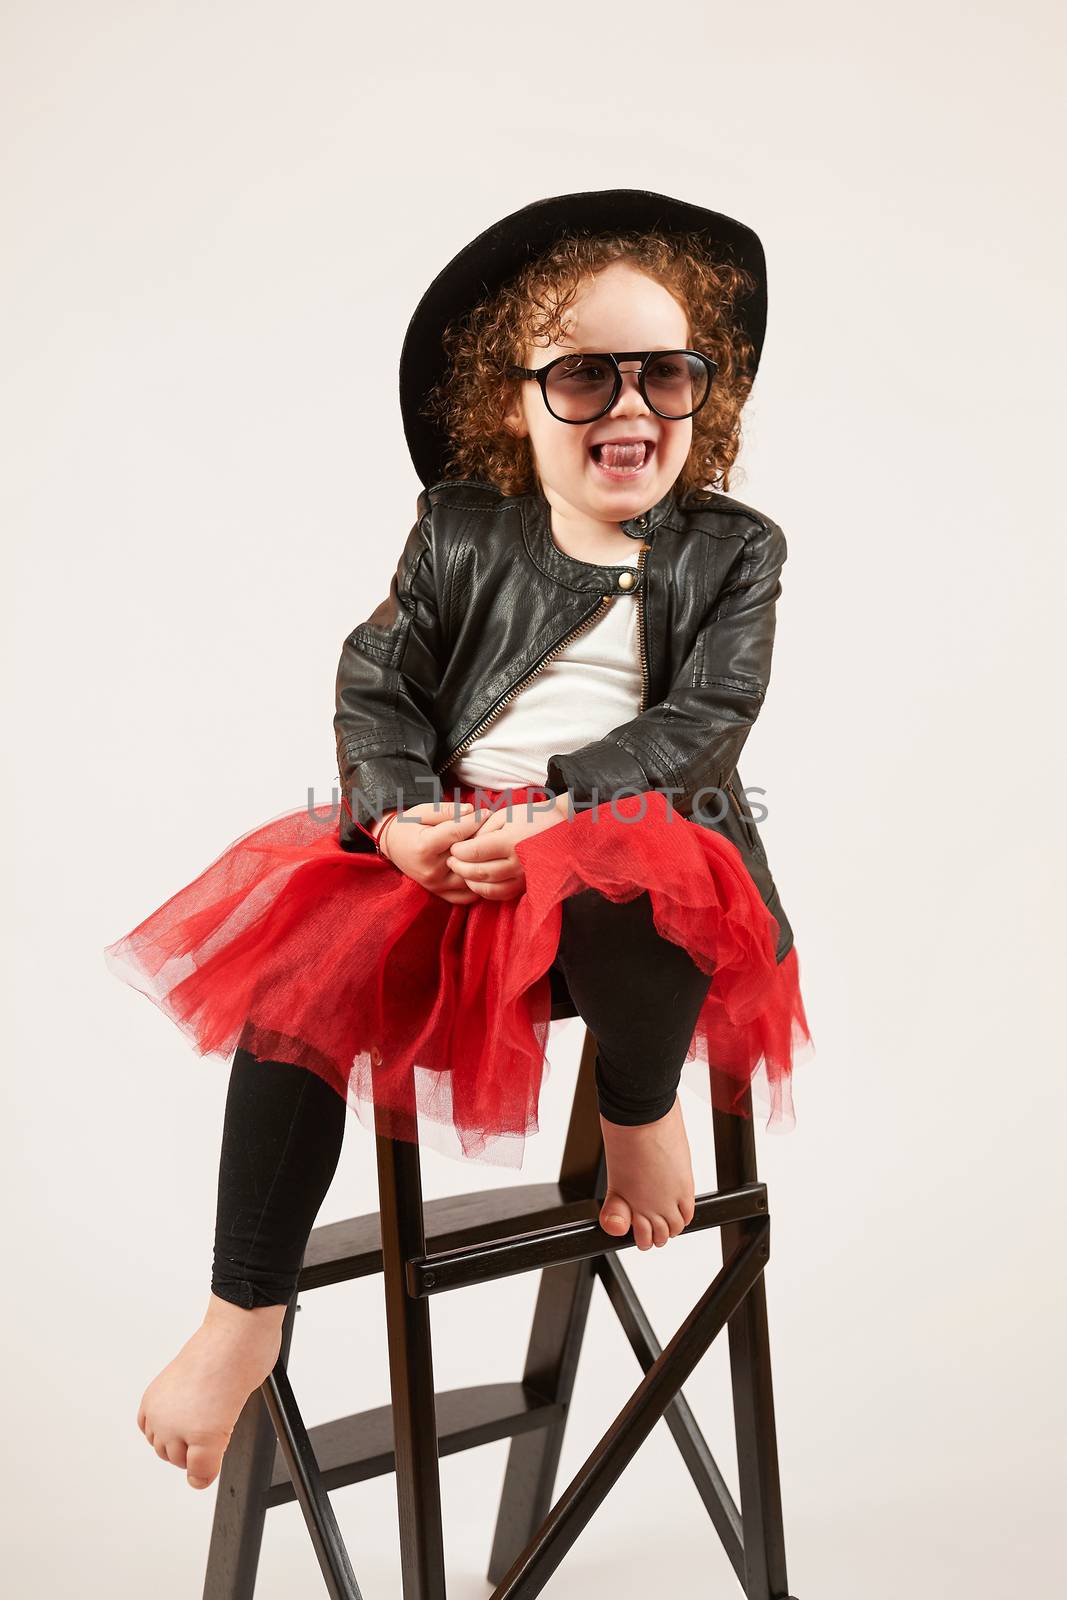 Little Girl Fashion Model With Black Hat by Multipedia